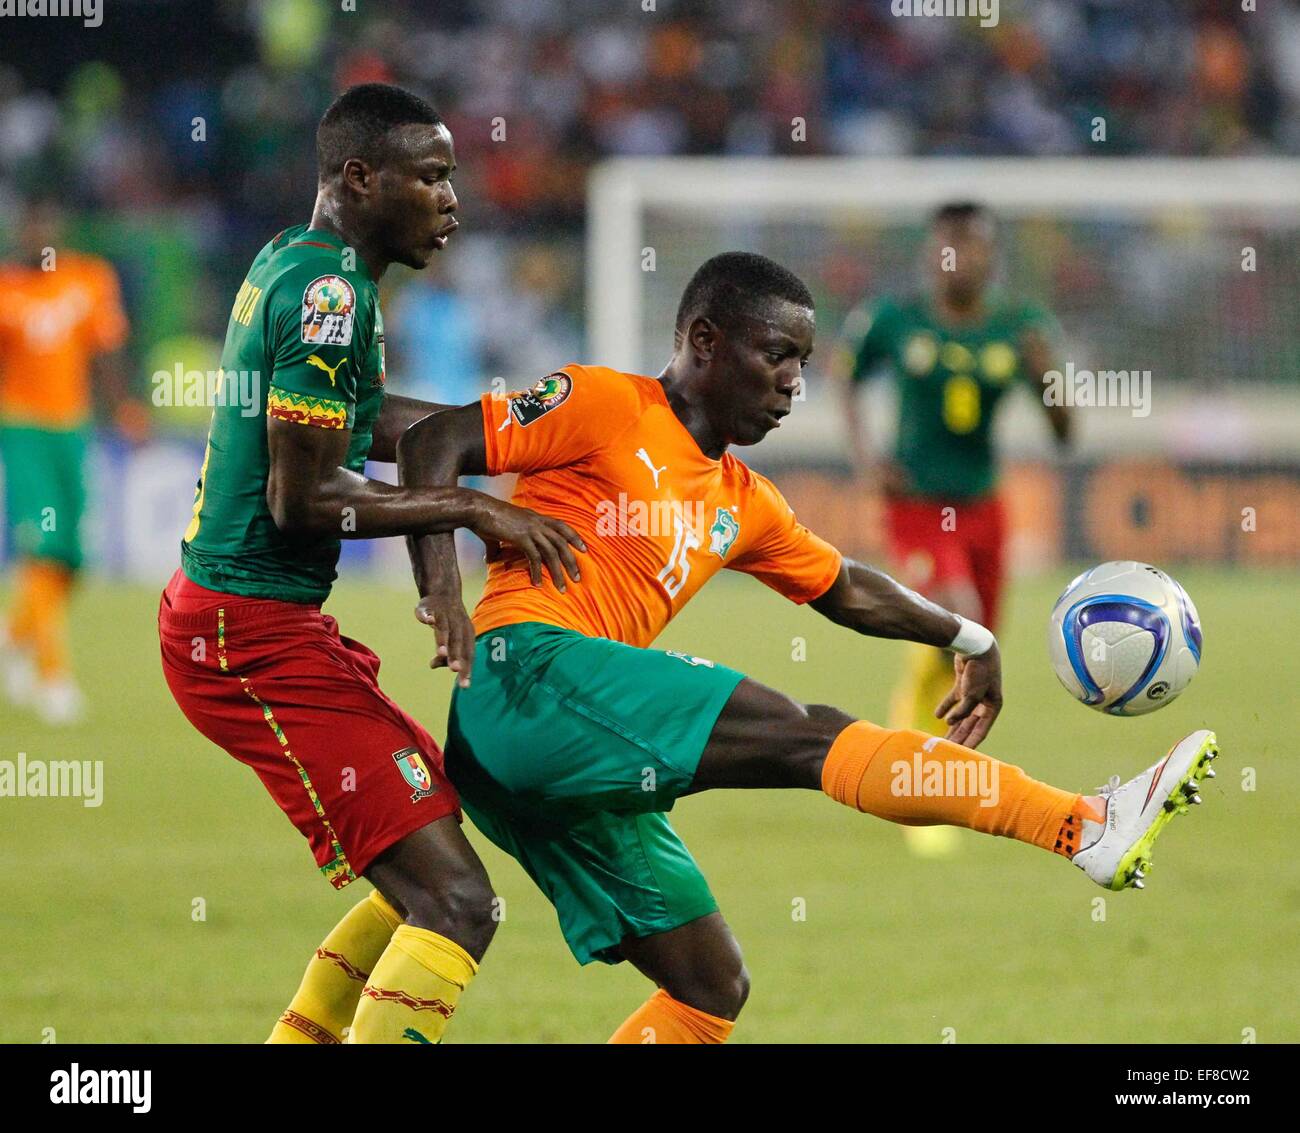 Malabo, Equatorial Guinea. 28th Jan, 2015. Max Alain Gradel (R) of Cote d'Ivoire competes during the group match of Africa Cup of Nations against Cameroon at the Stadium of Malabo, Equatorial Guinea, Jan. 28, 2015. Cote d'Ivoire won 1-0. Credit:  Li Jing/Xinhua/Alamy Live News Stock Photo